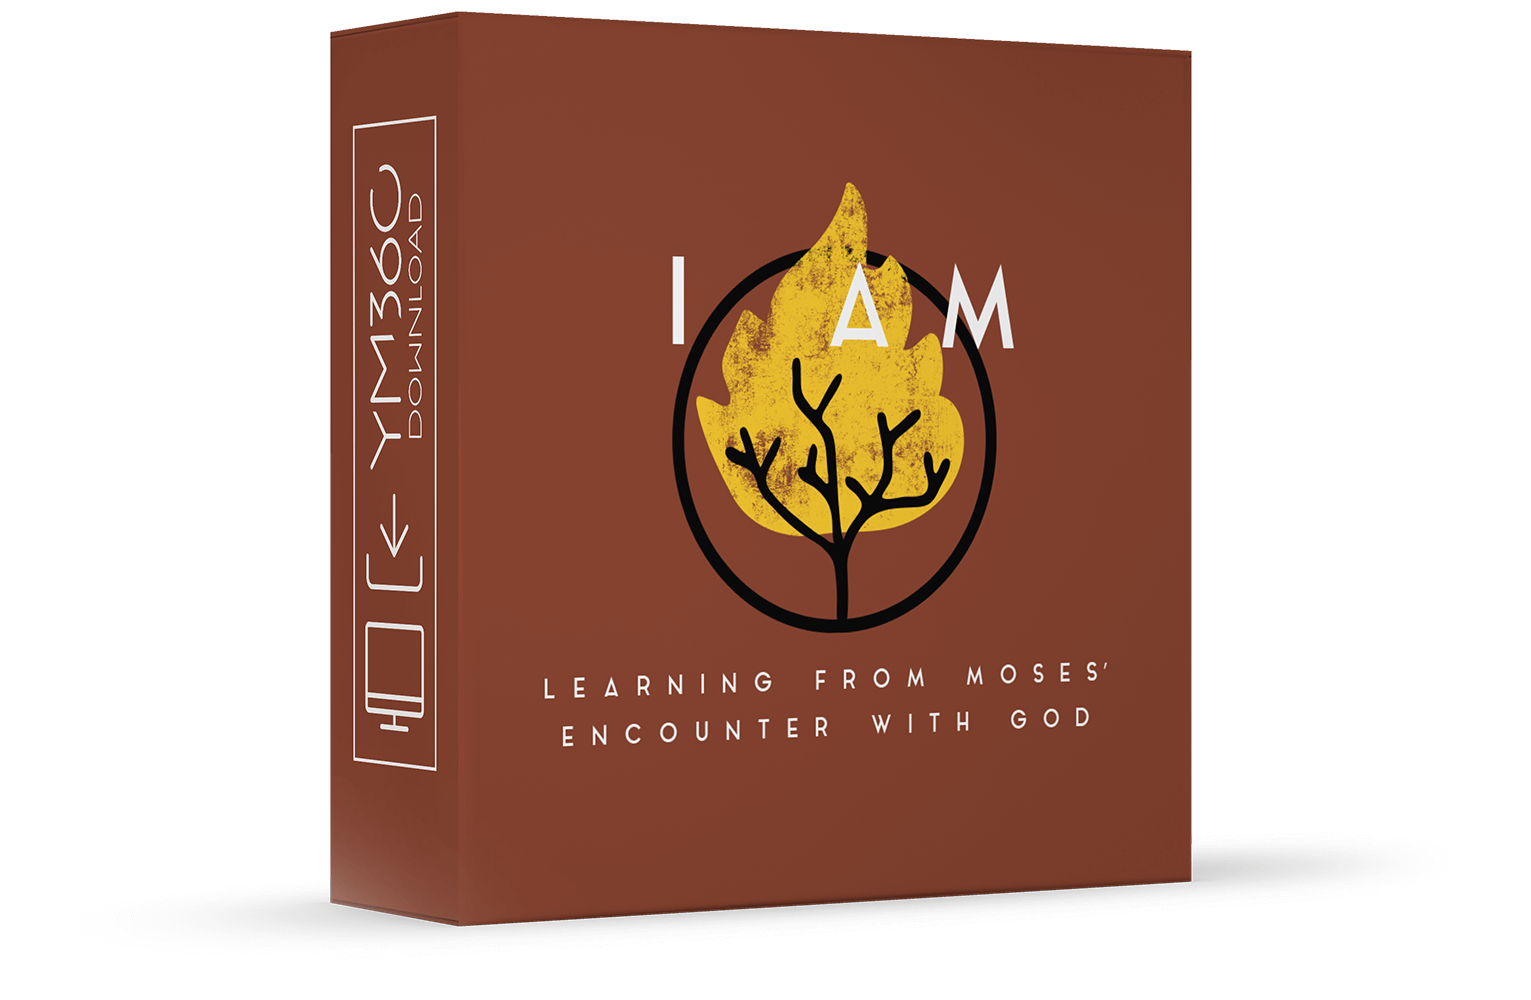 I Am: Learning From Moses' Encounter With God